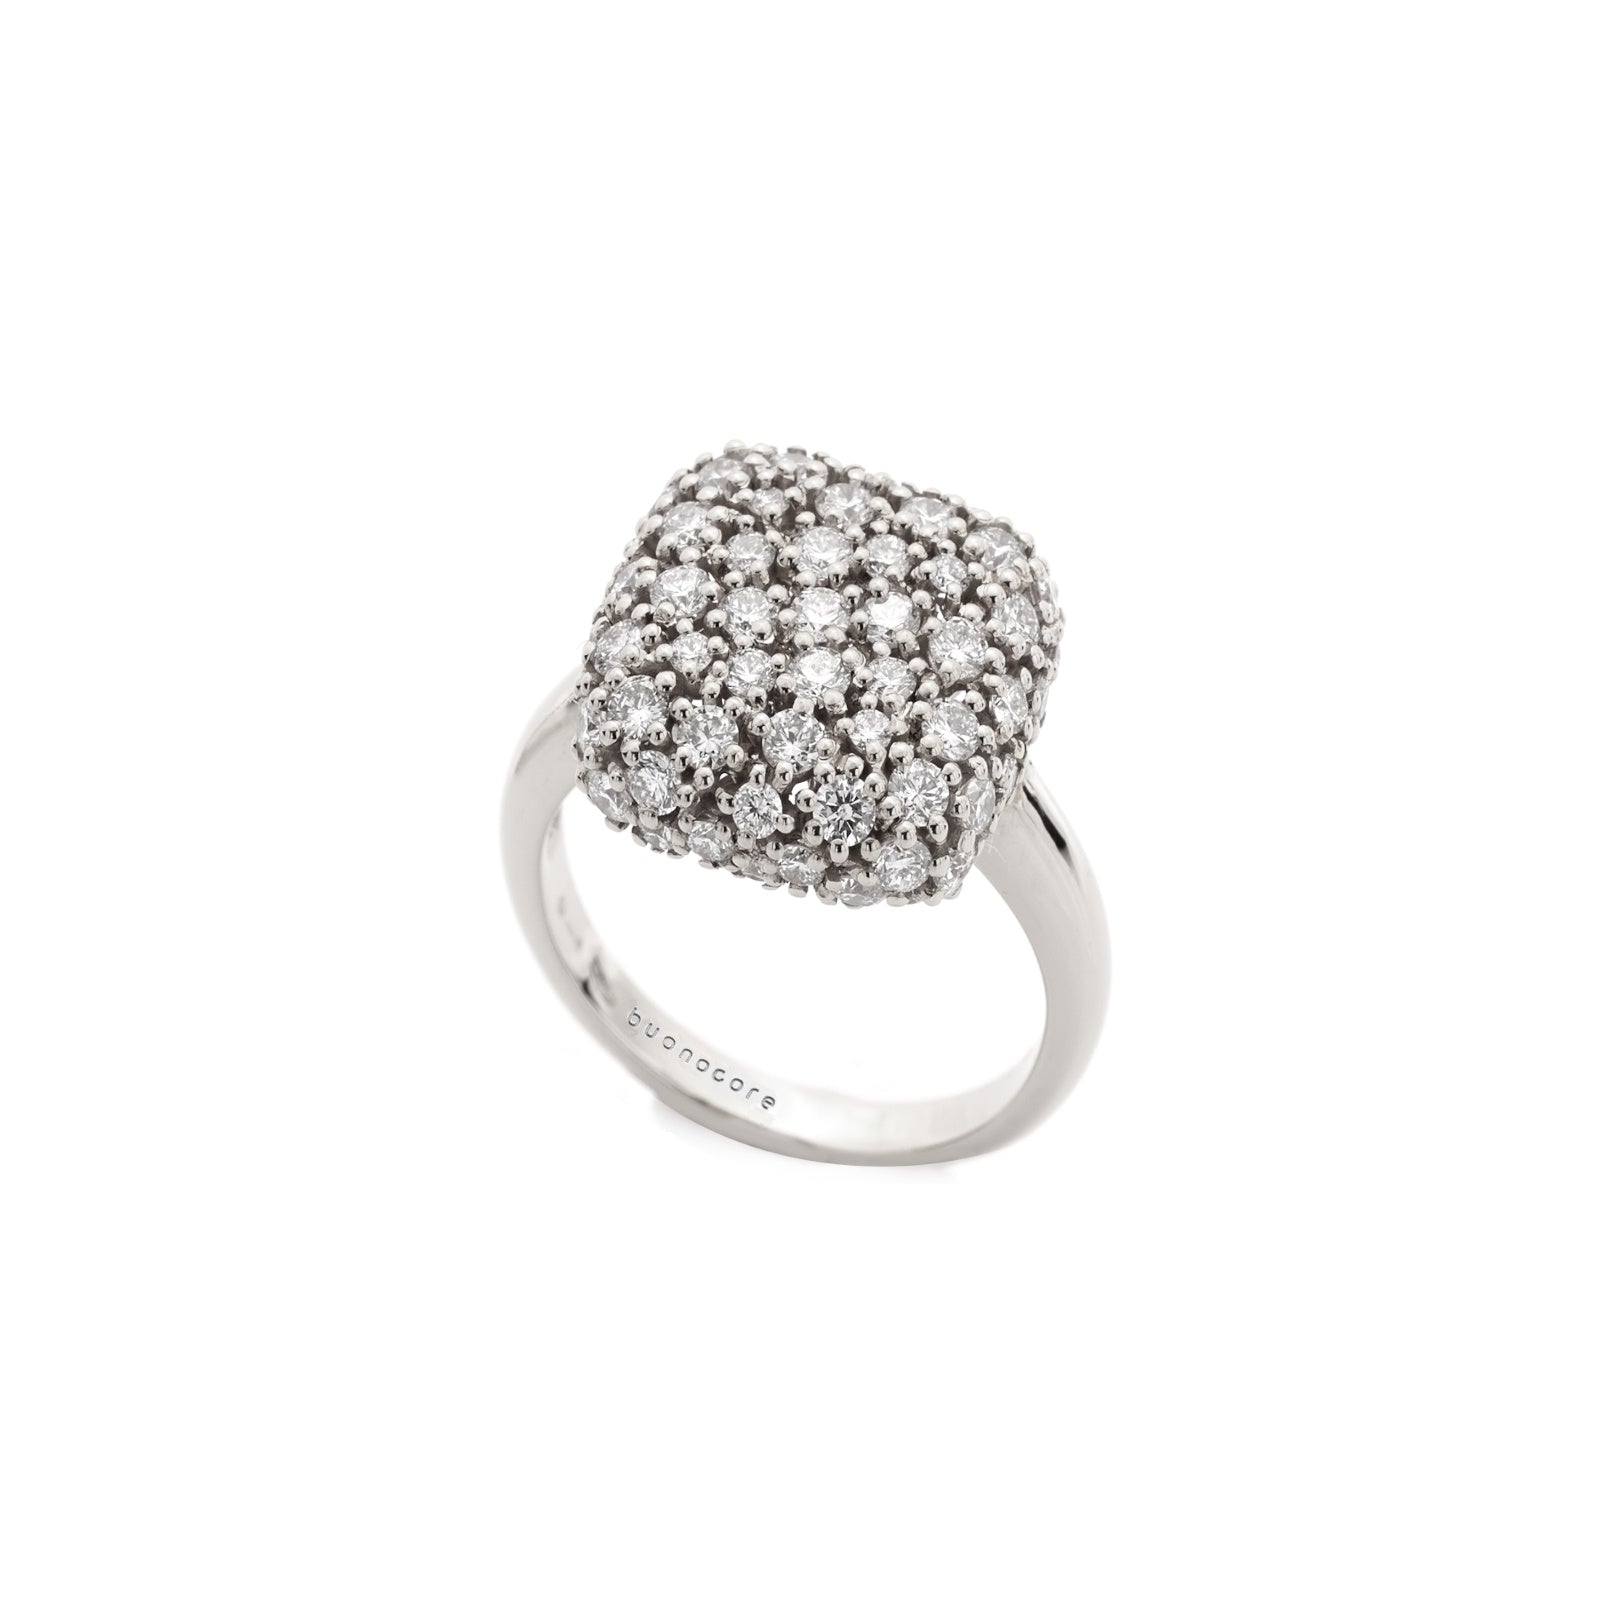 18 KT WHITE GOLD RING
 "CUSHION" AND WHITE DIAMONDS - 130A01DW